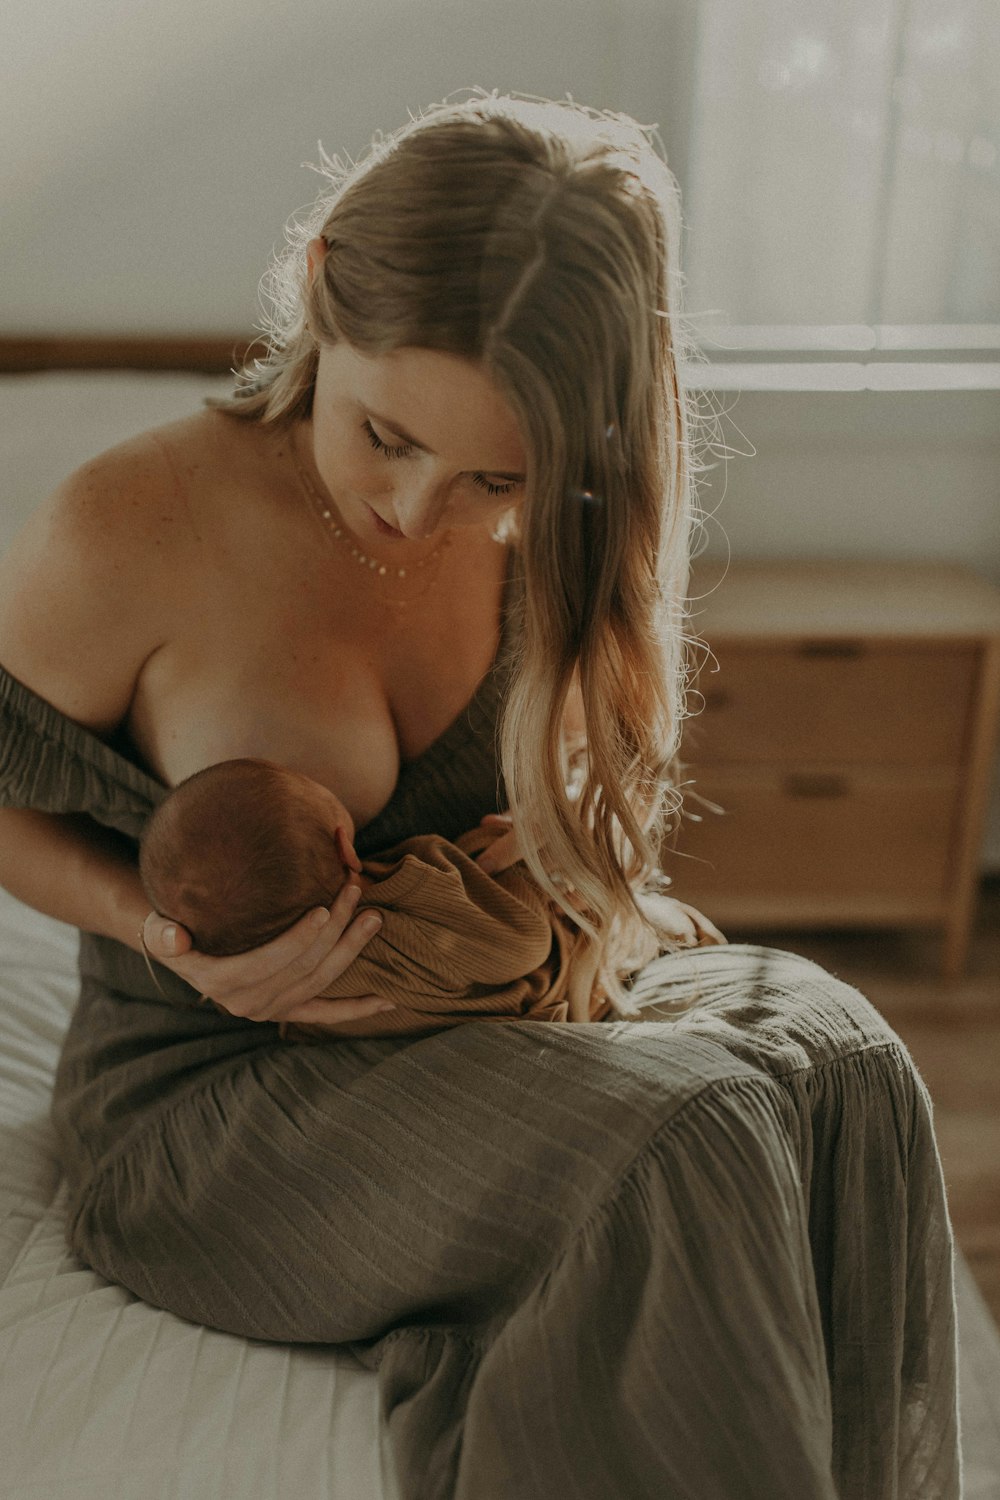 a woman holding a baby while sitting on a bed